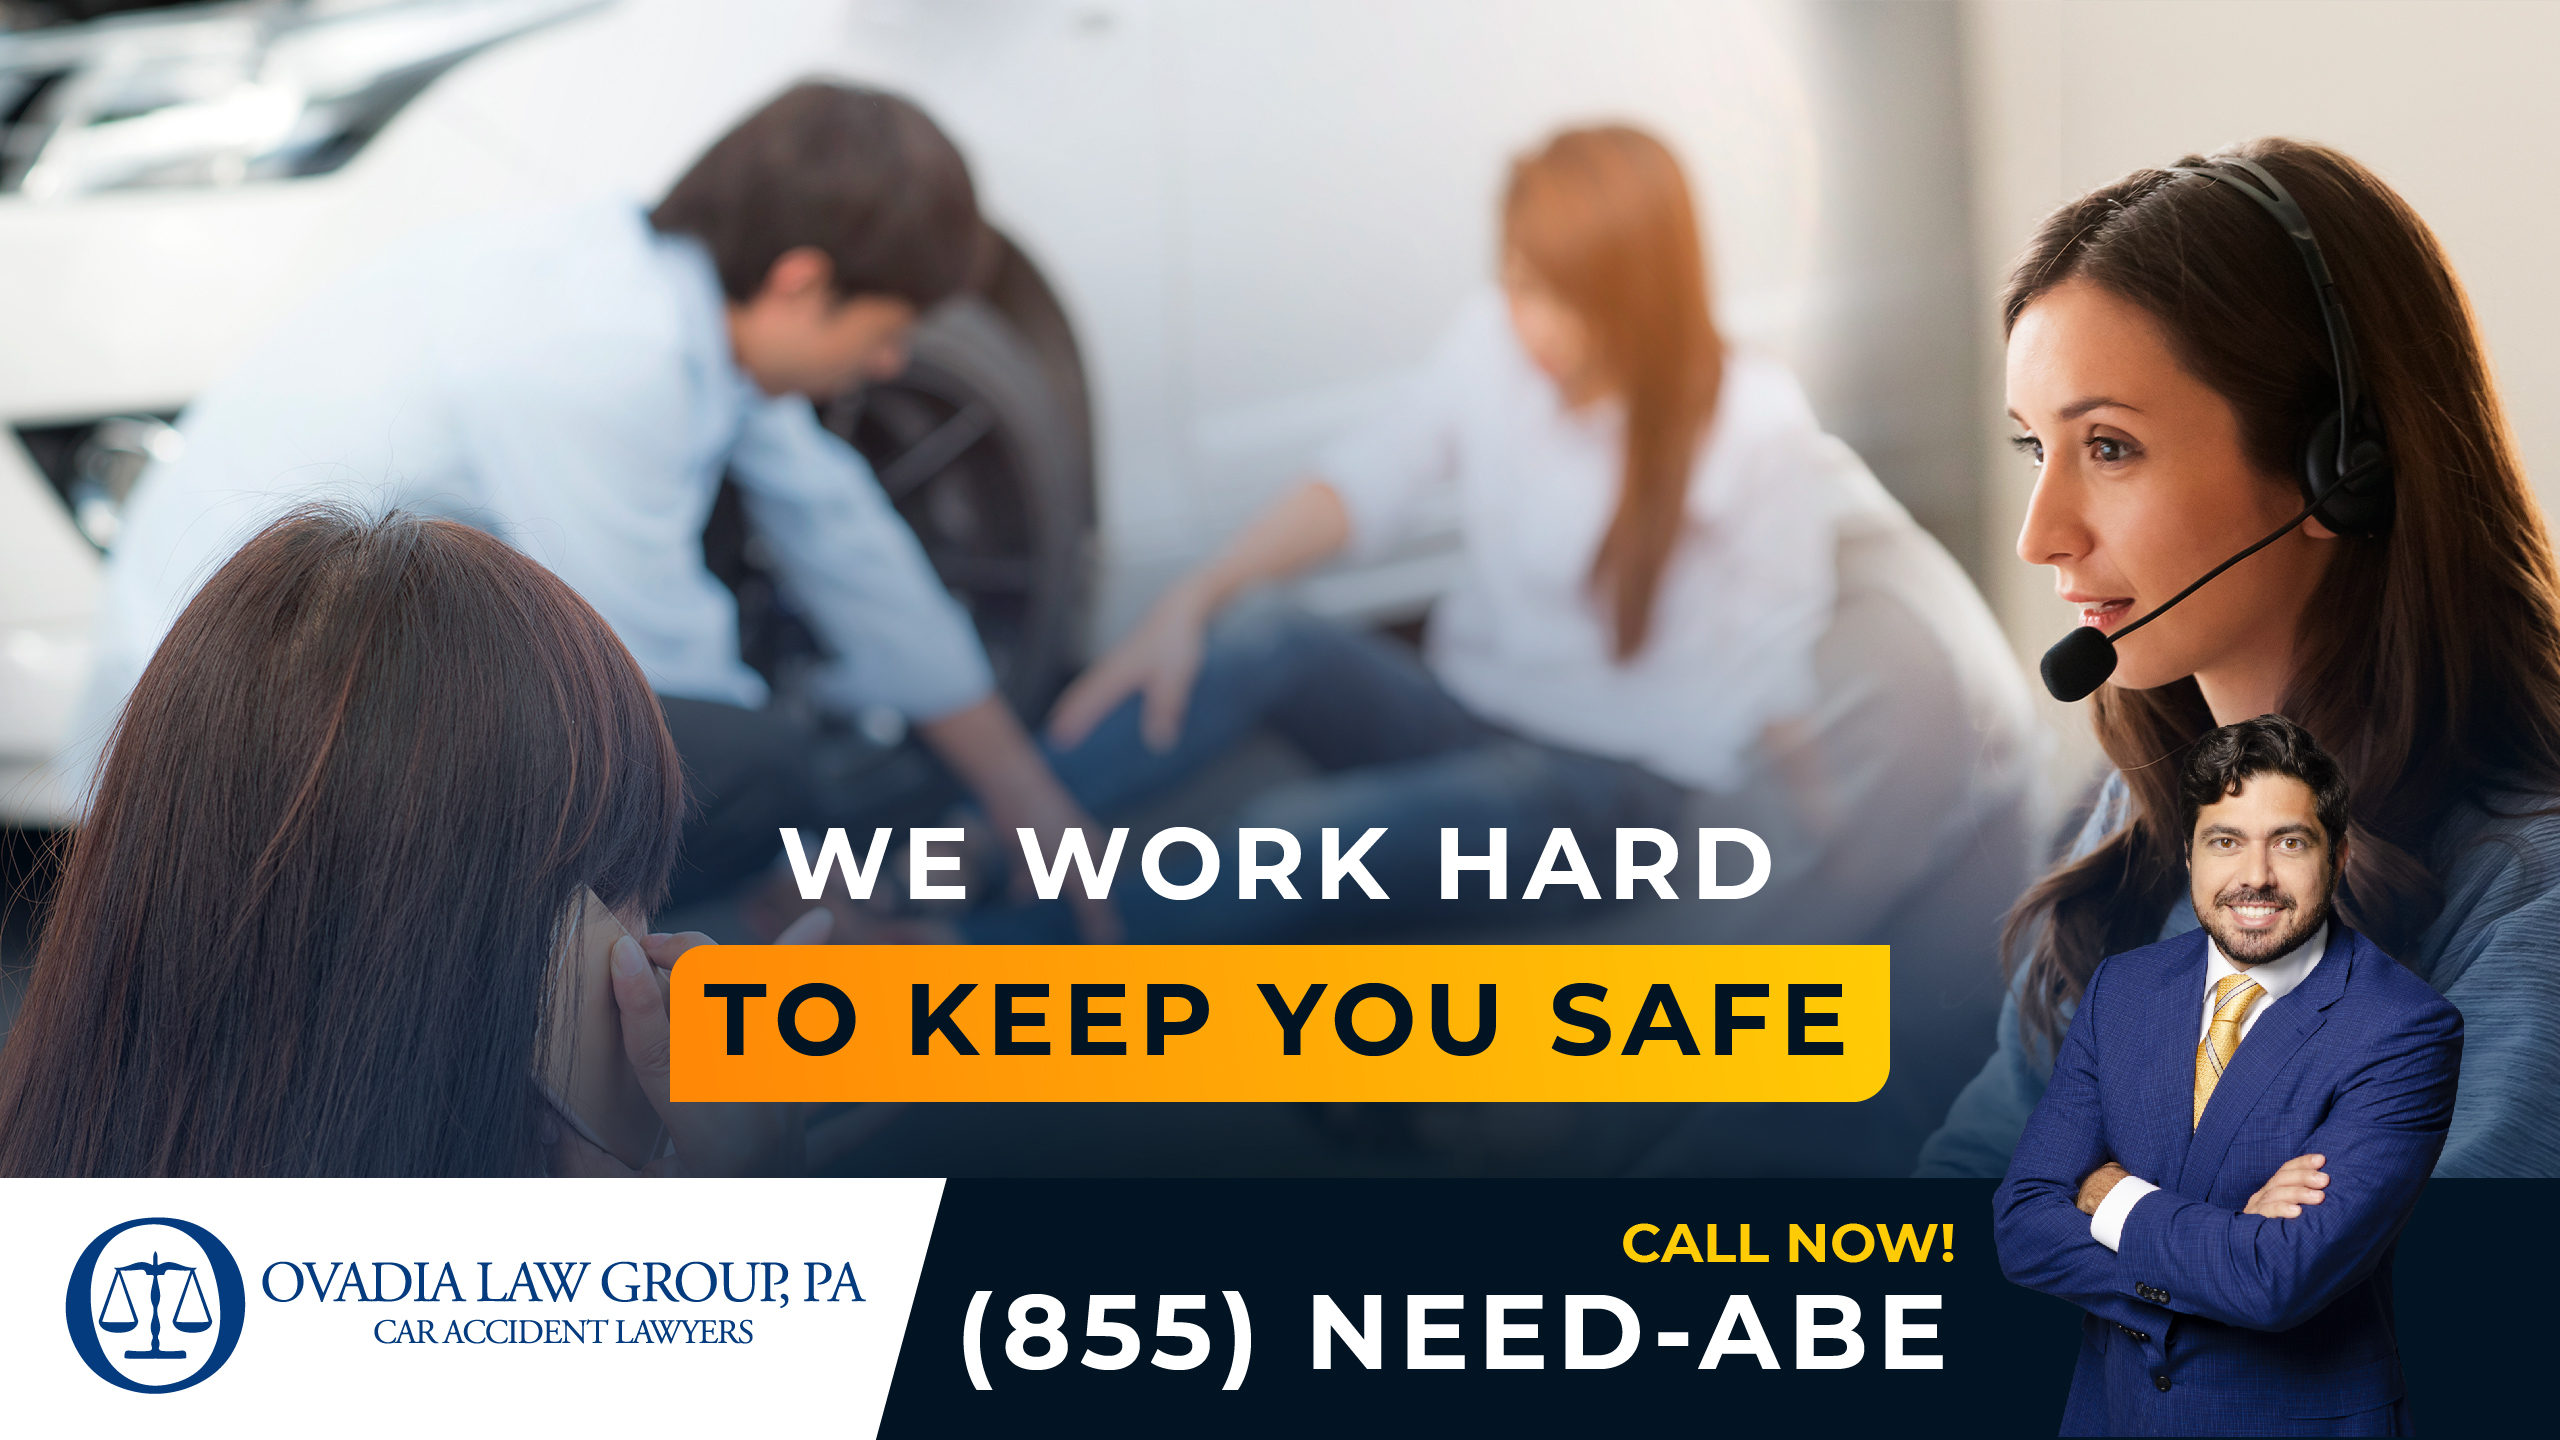 Ovadia Law Group,PA is the solution after a Car accident in Miami.